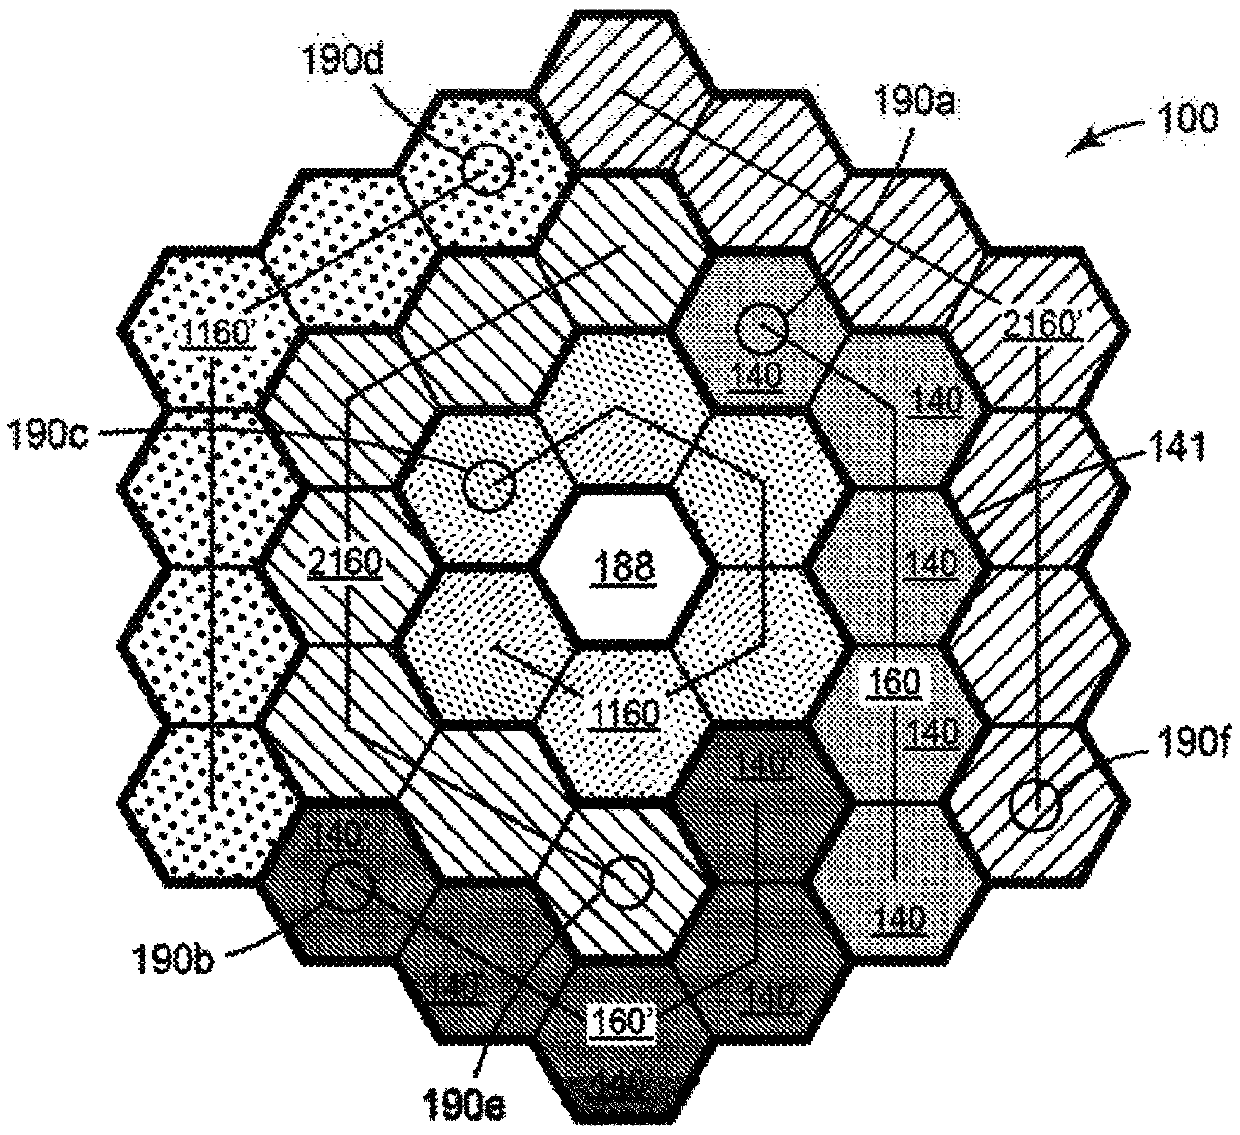 Sound-absorbing panels comprising a core consisting of connected cells, wherein some of the cell walls have openings